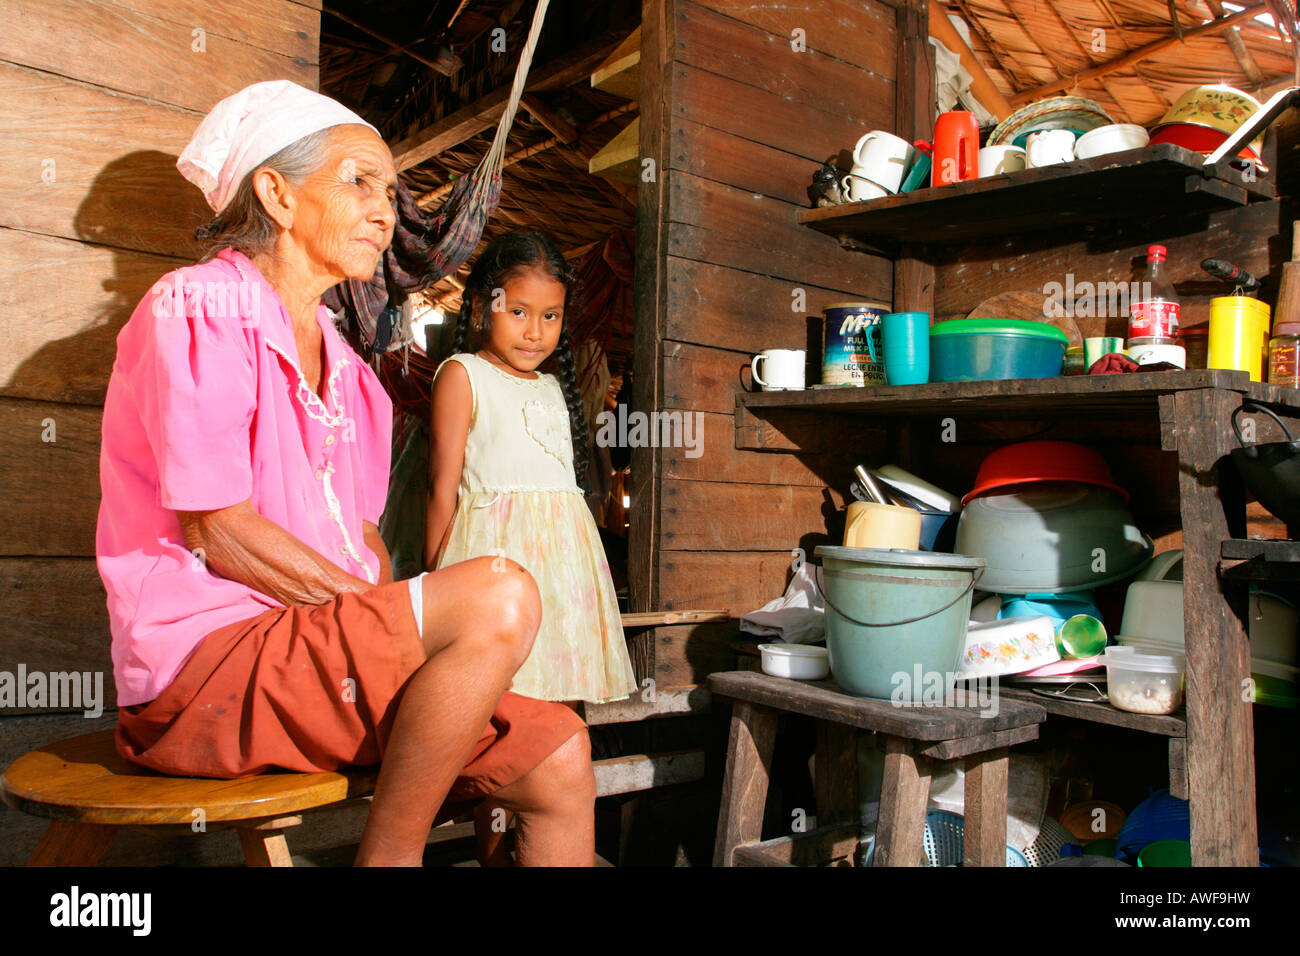 Grandmother with grandchild in the kitchen, Amerindians of the Arawak tribe, Santa Mission, Guyana, South America Stock Photo